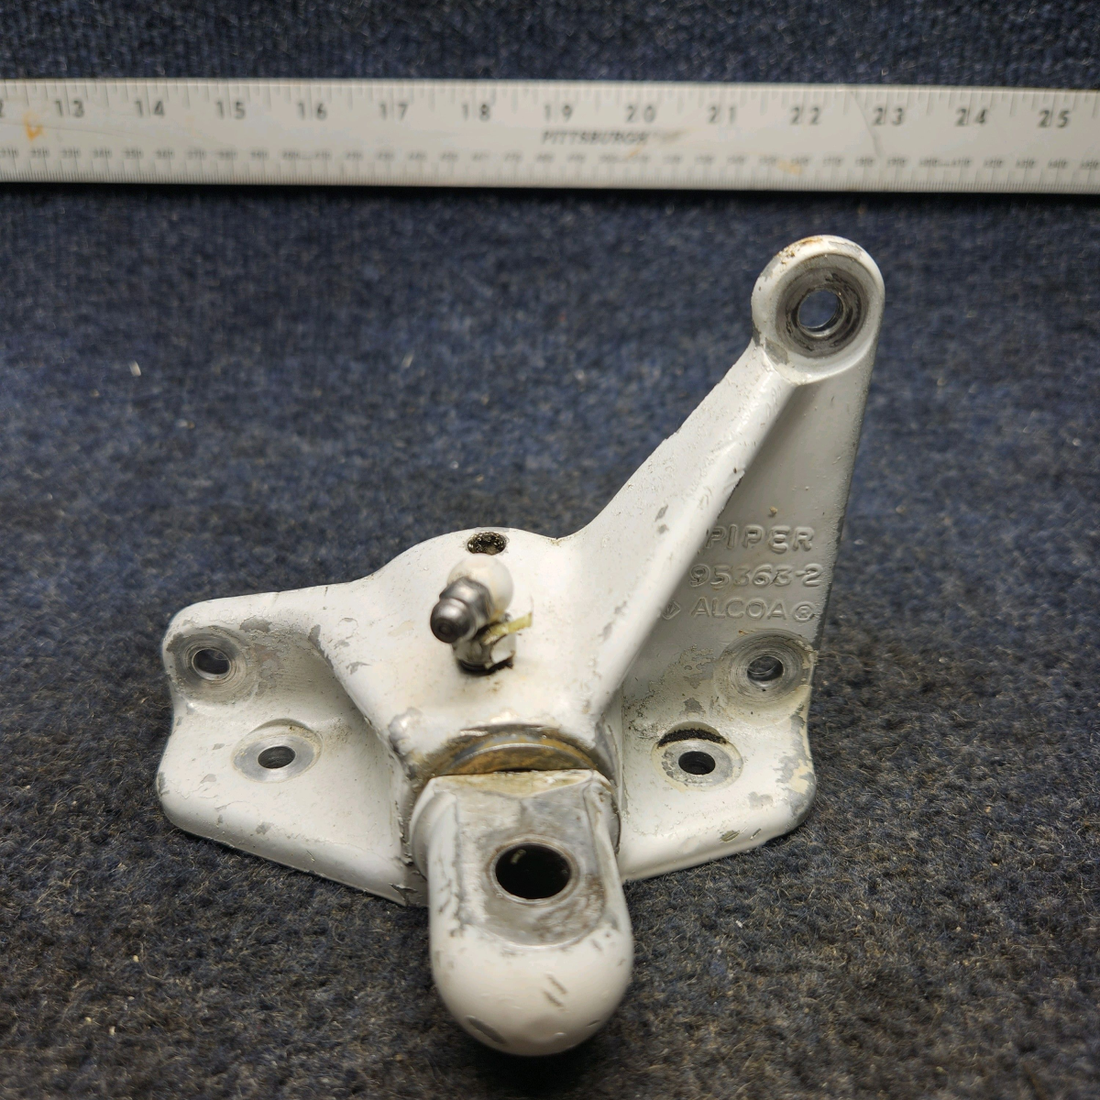 Used aircraft parts for sale, 95643-006 Piper PA32RT-300 MAIN GEAR TRUSS BRACKET ASSEMBLY LH (3/8")